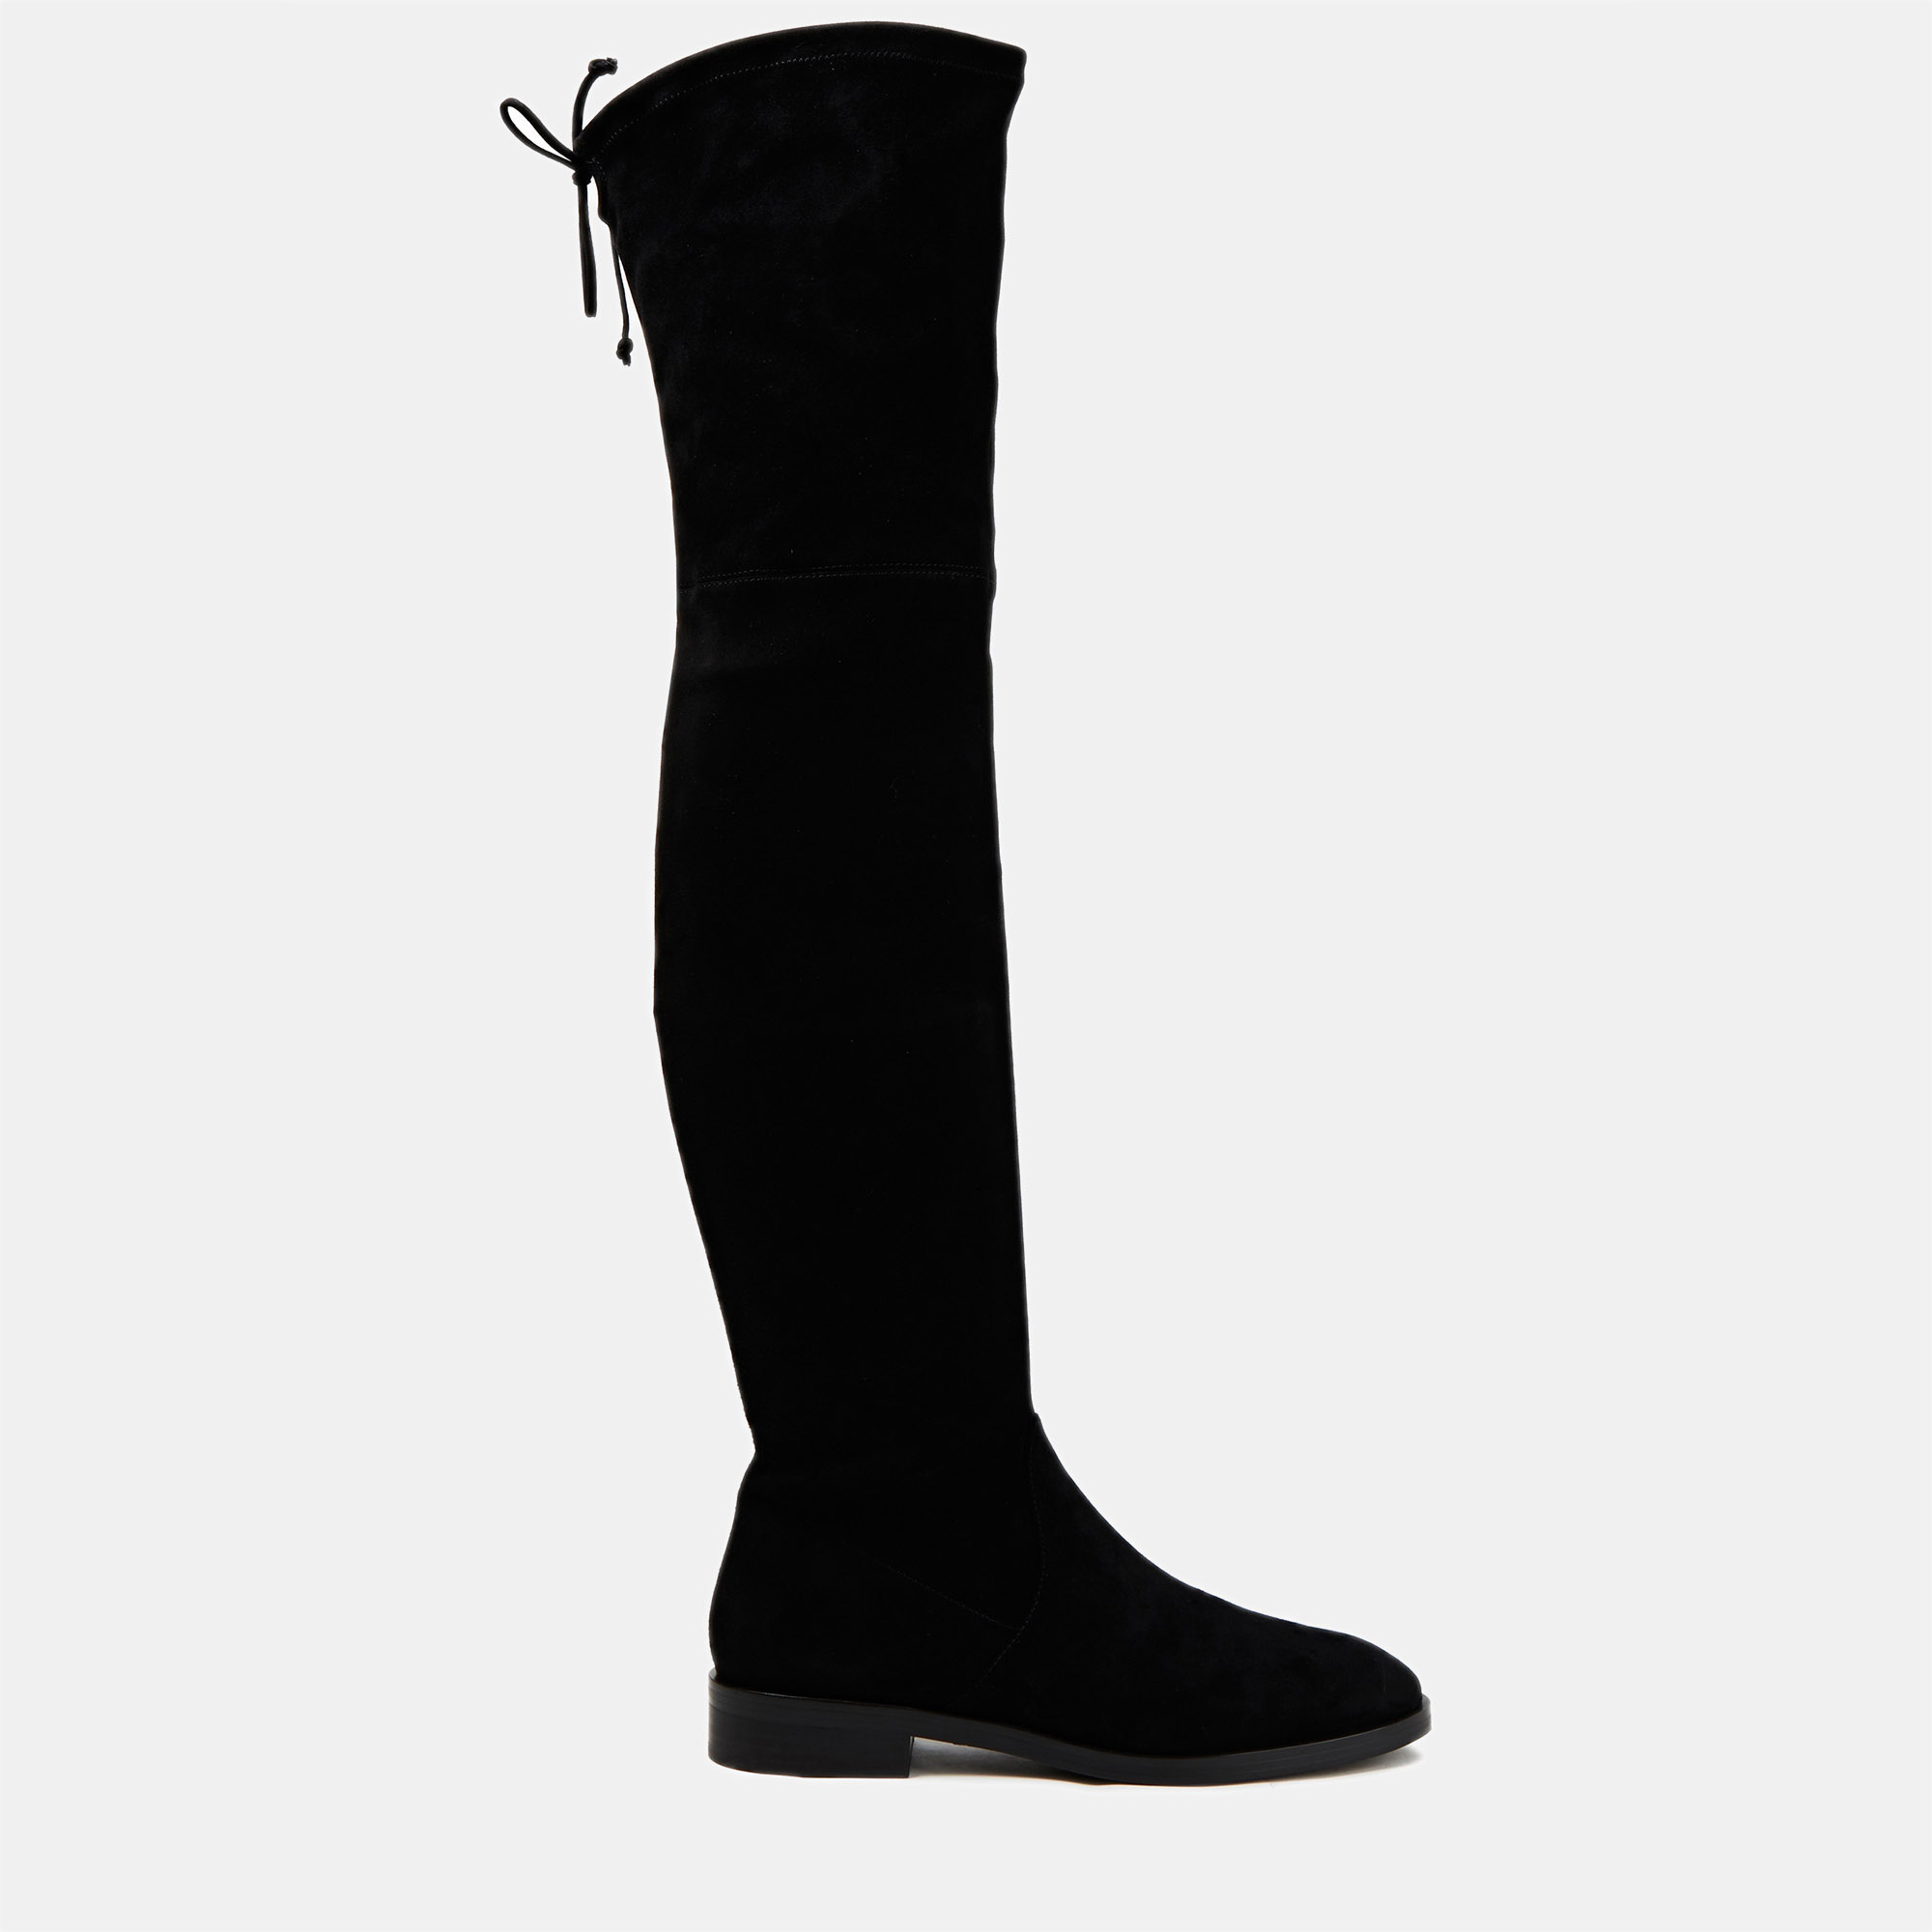 Pre-owned Stuart Weitzman Black Suede Over The Knee Boots Size 40